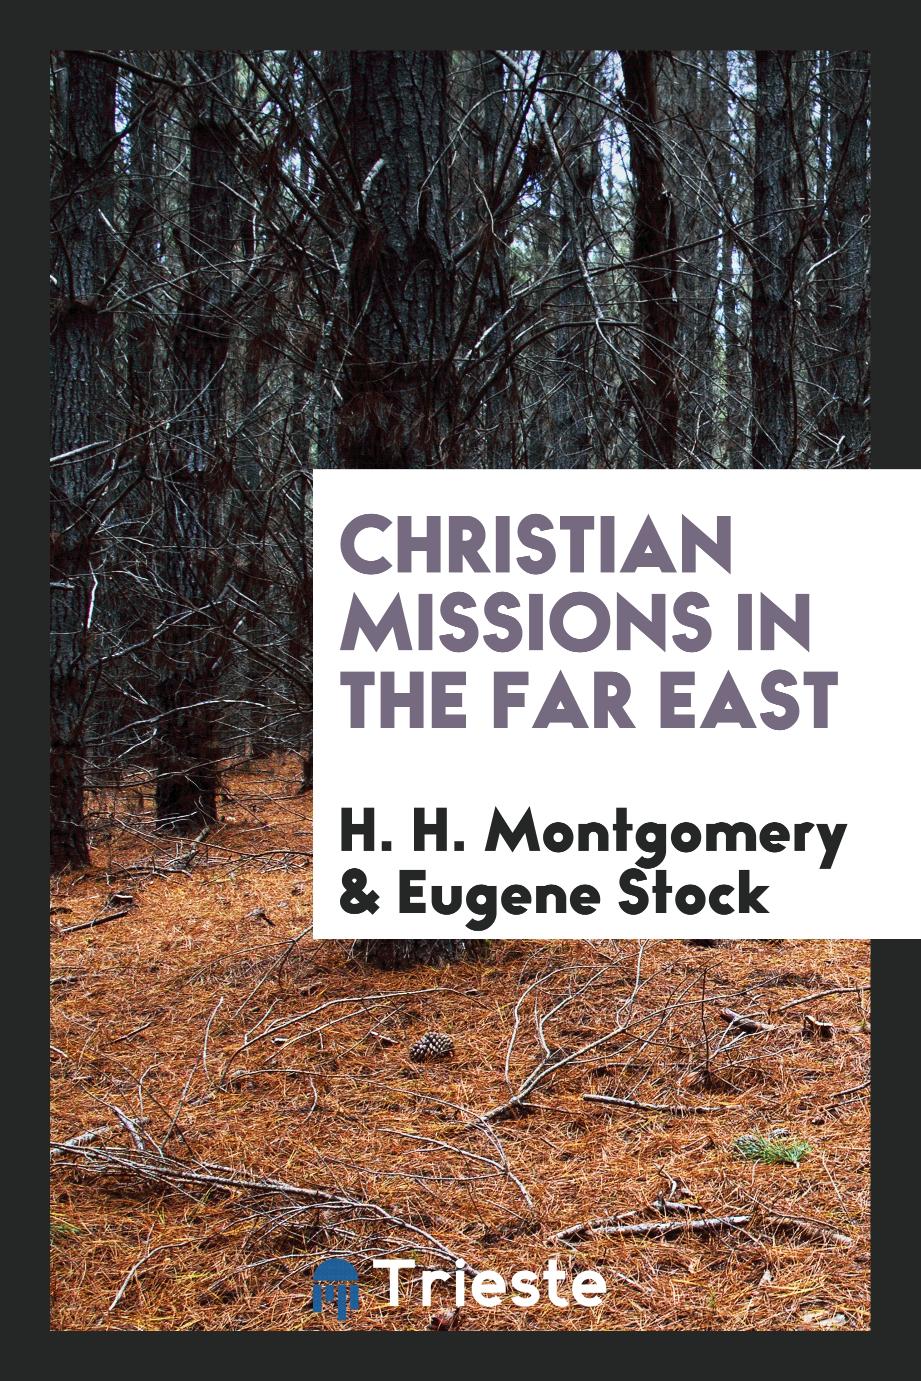 Christian missions in the Far East